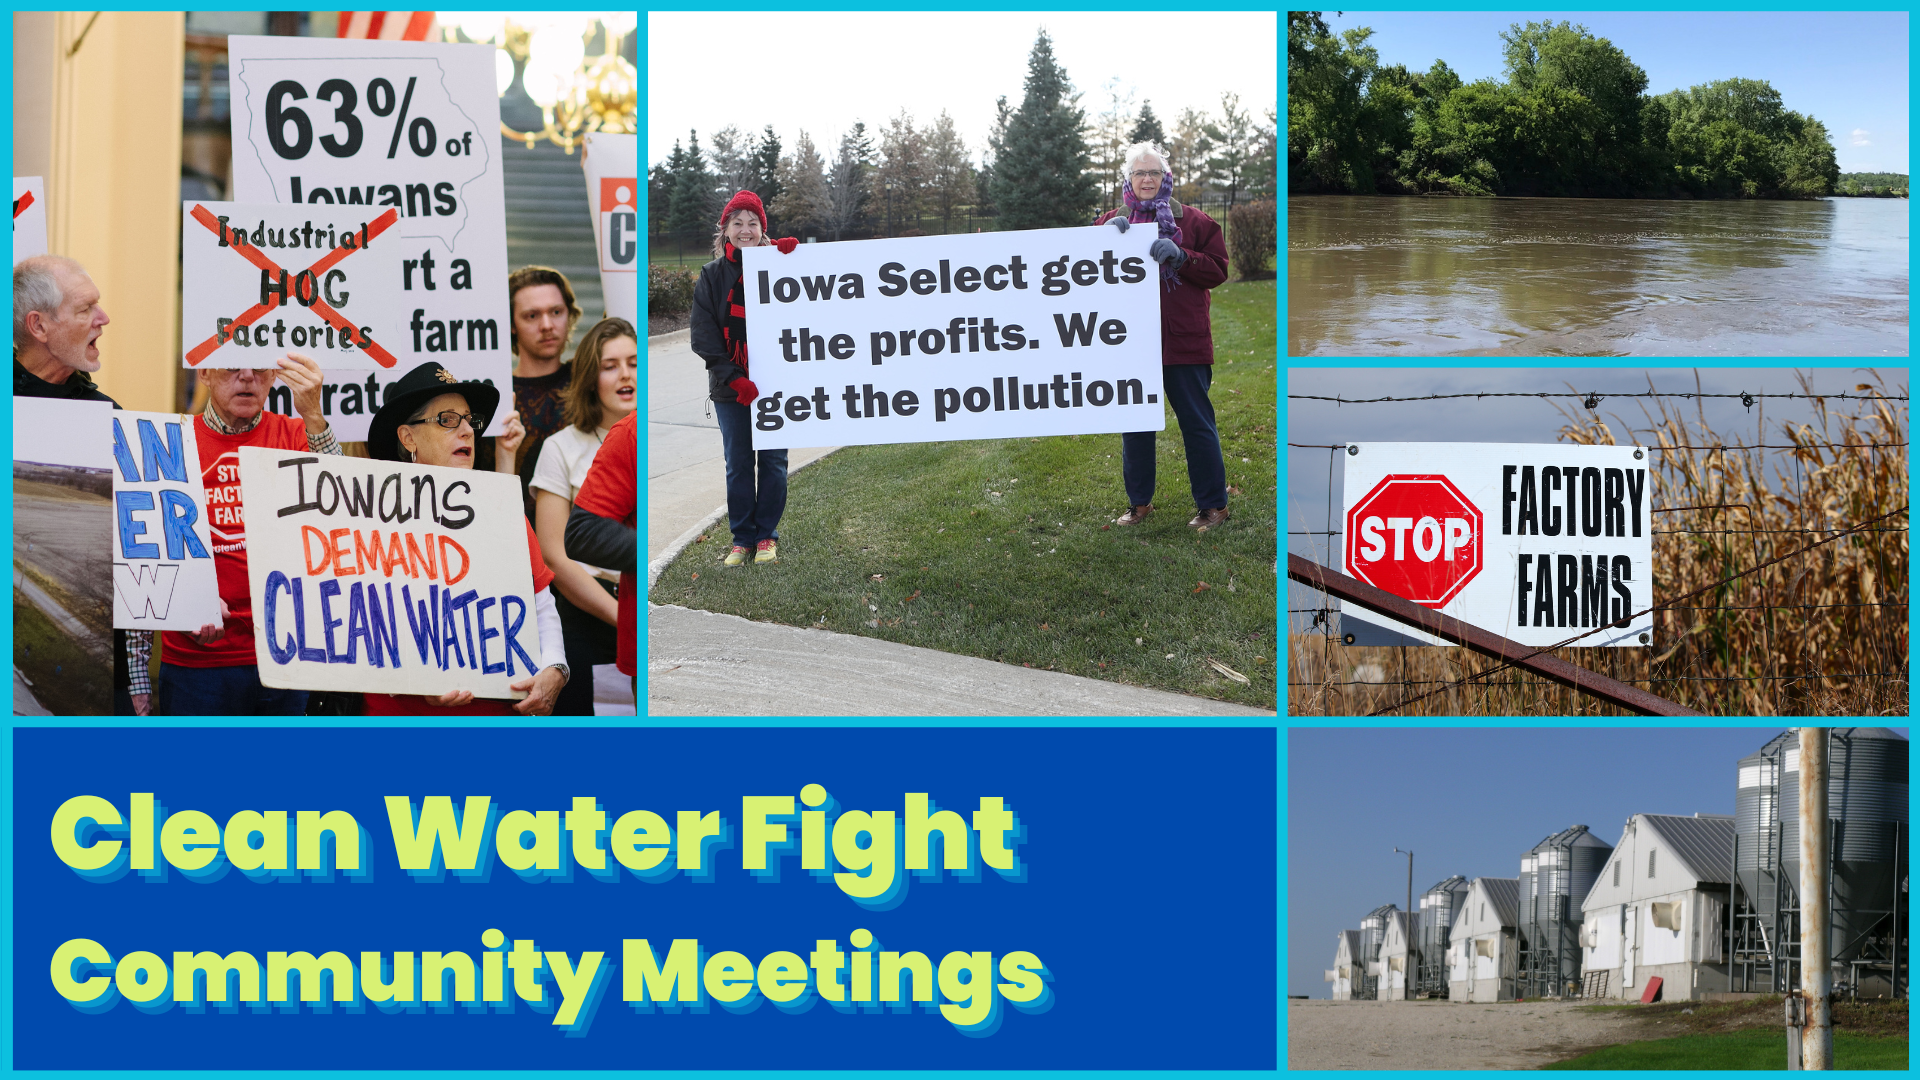 Clean Water Fight: Statewide Meeting